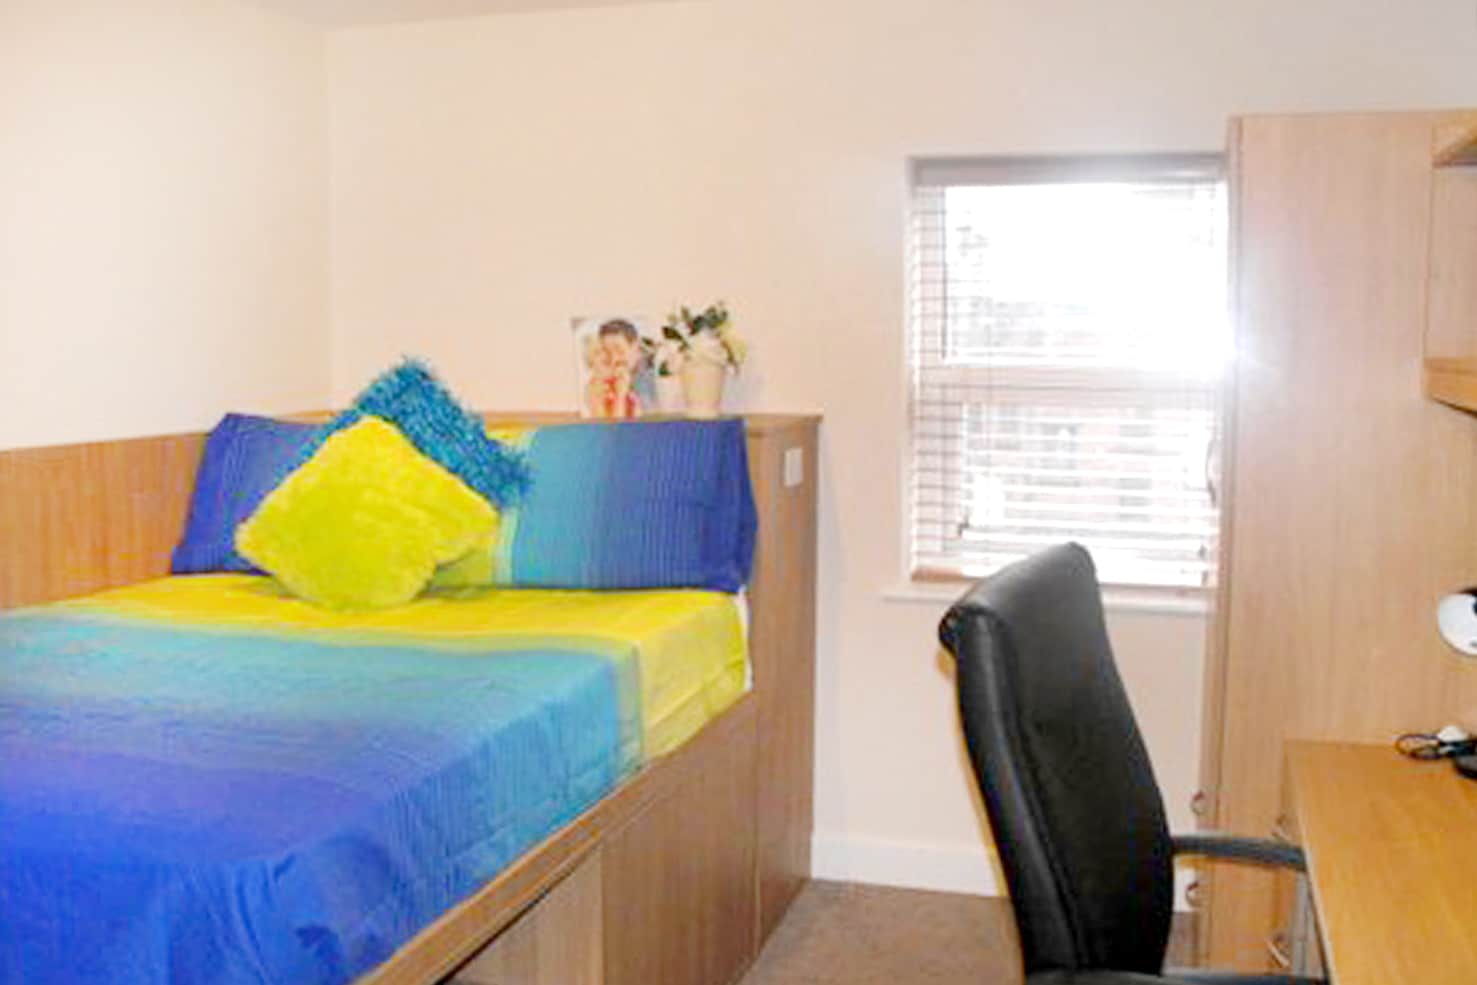 4 bedroom ground floor flat to rent for students in Preston at the Jazz Bar